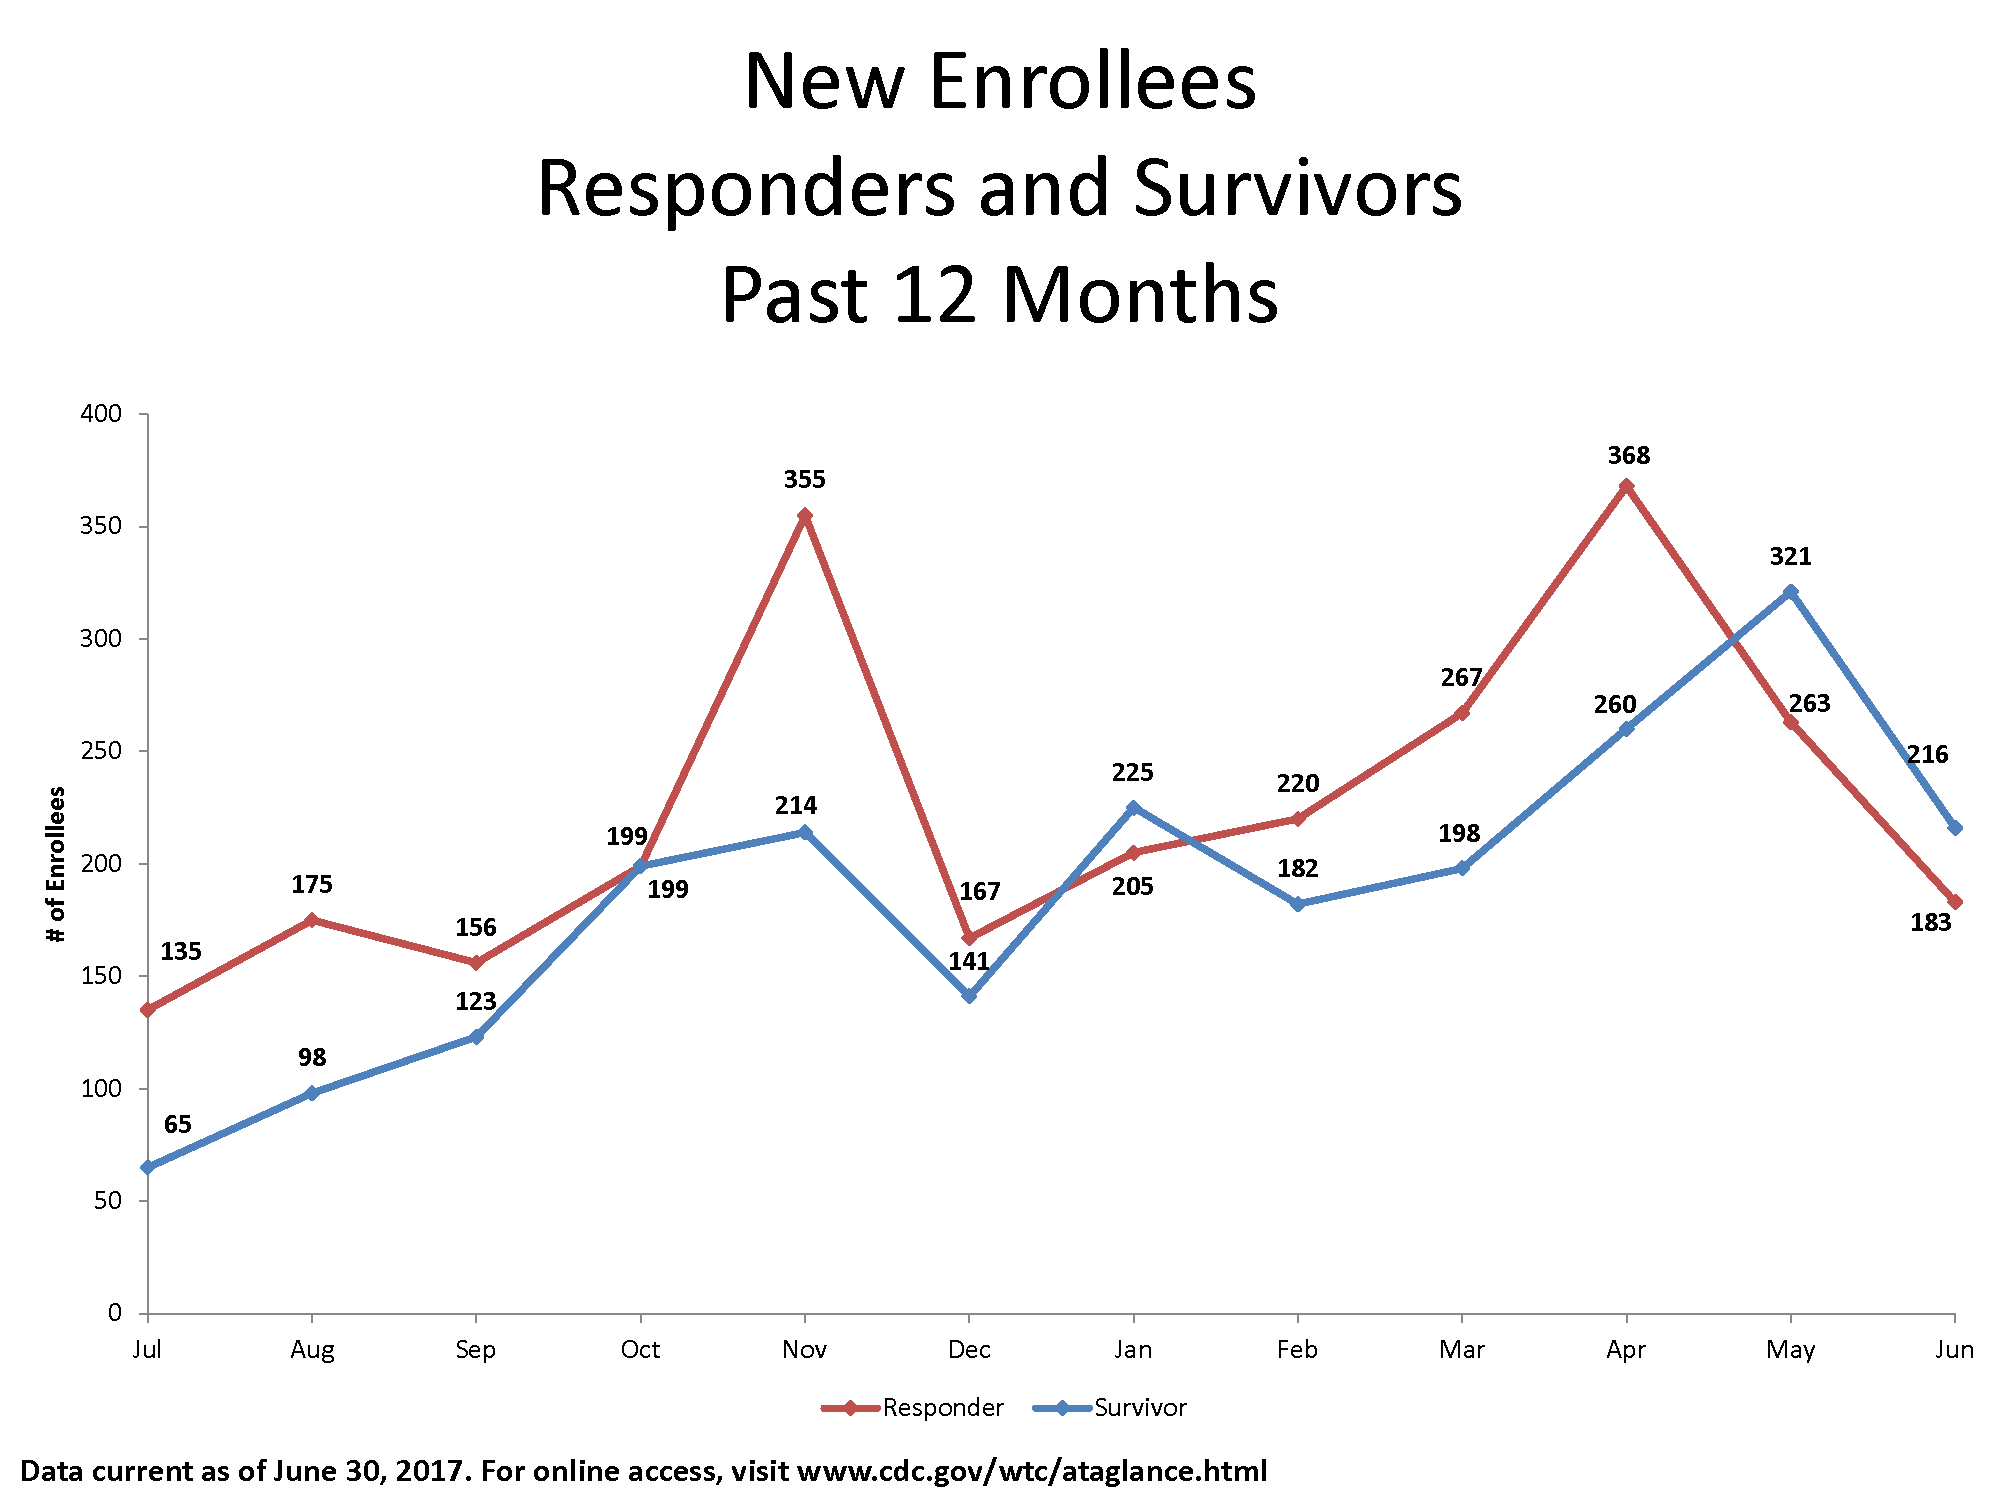 Line graph of newly enrolled members by month from July 2016 through June 2017 as follows:

July 2016: 135 Responders and 65 Survivors
August 2016: 175 Responders and 98 Survivors
September 2016: 156 Responders and 123 Survivors
October 2016: 199 Responders and 199 Survivors
November 2016: 355 Responders and 214 Survivors
December 2016: 167 Responders and 141 Survivors
January 2017: 225 Responders and 204 Survivors
February 2017: 219 Responders and 182 Survivors
March 2017: 267 Responders and 192 Survivors
April 2017: 368 Responders and 260 Survivors
May 2017: 263 Responders and 321 Survivors
June 2017: 183 Responders and 216 Survivors